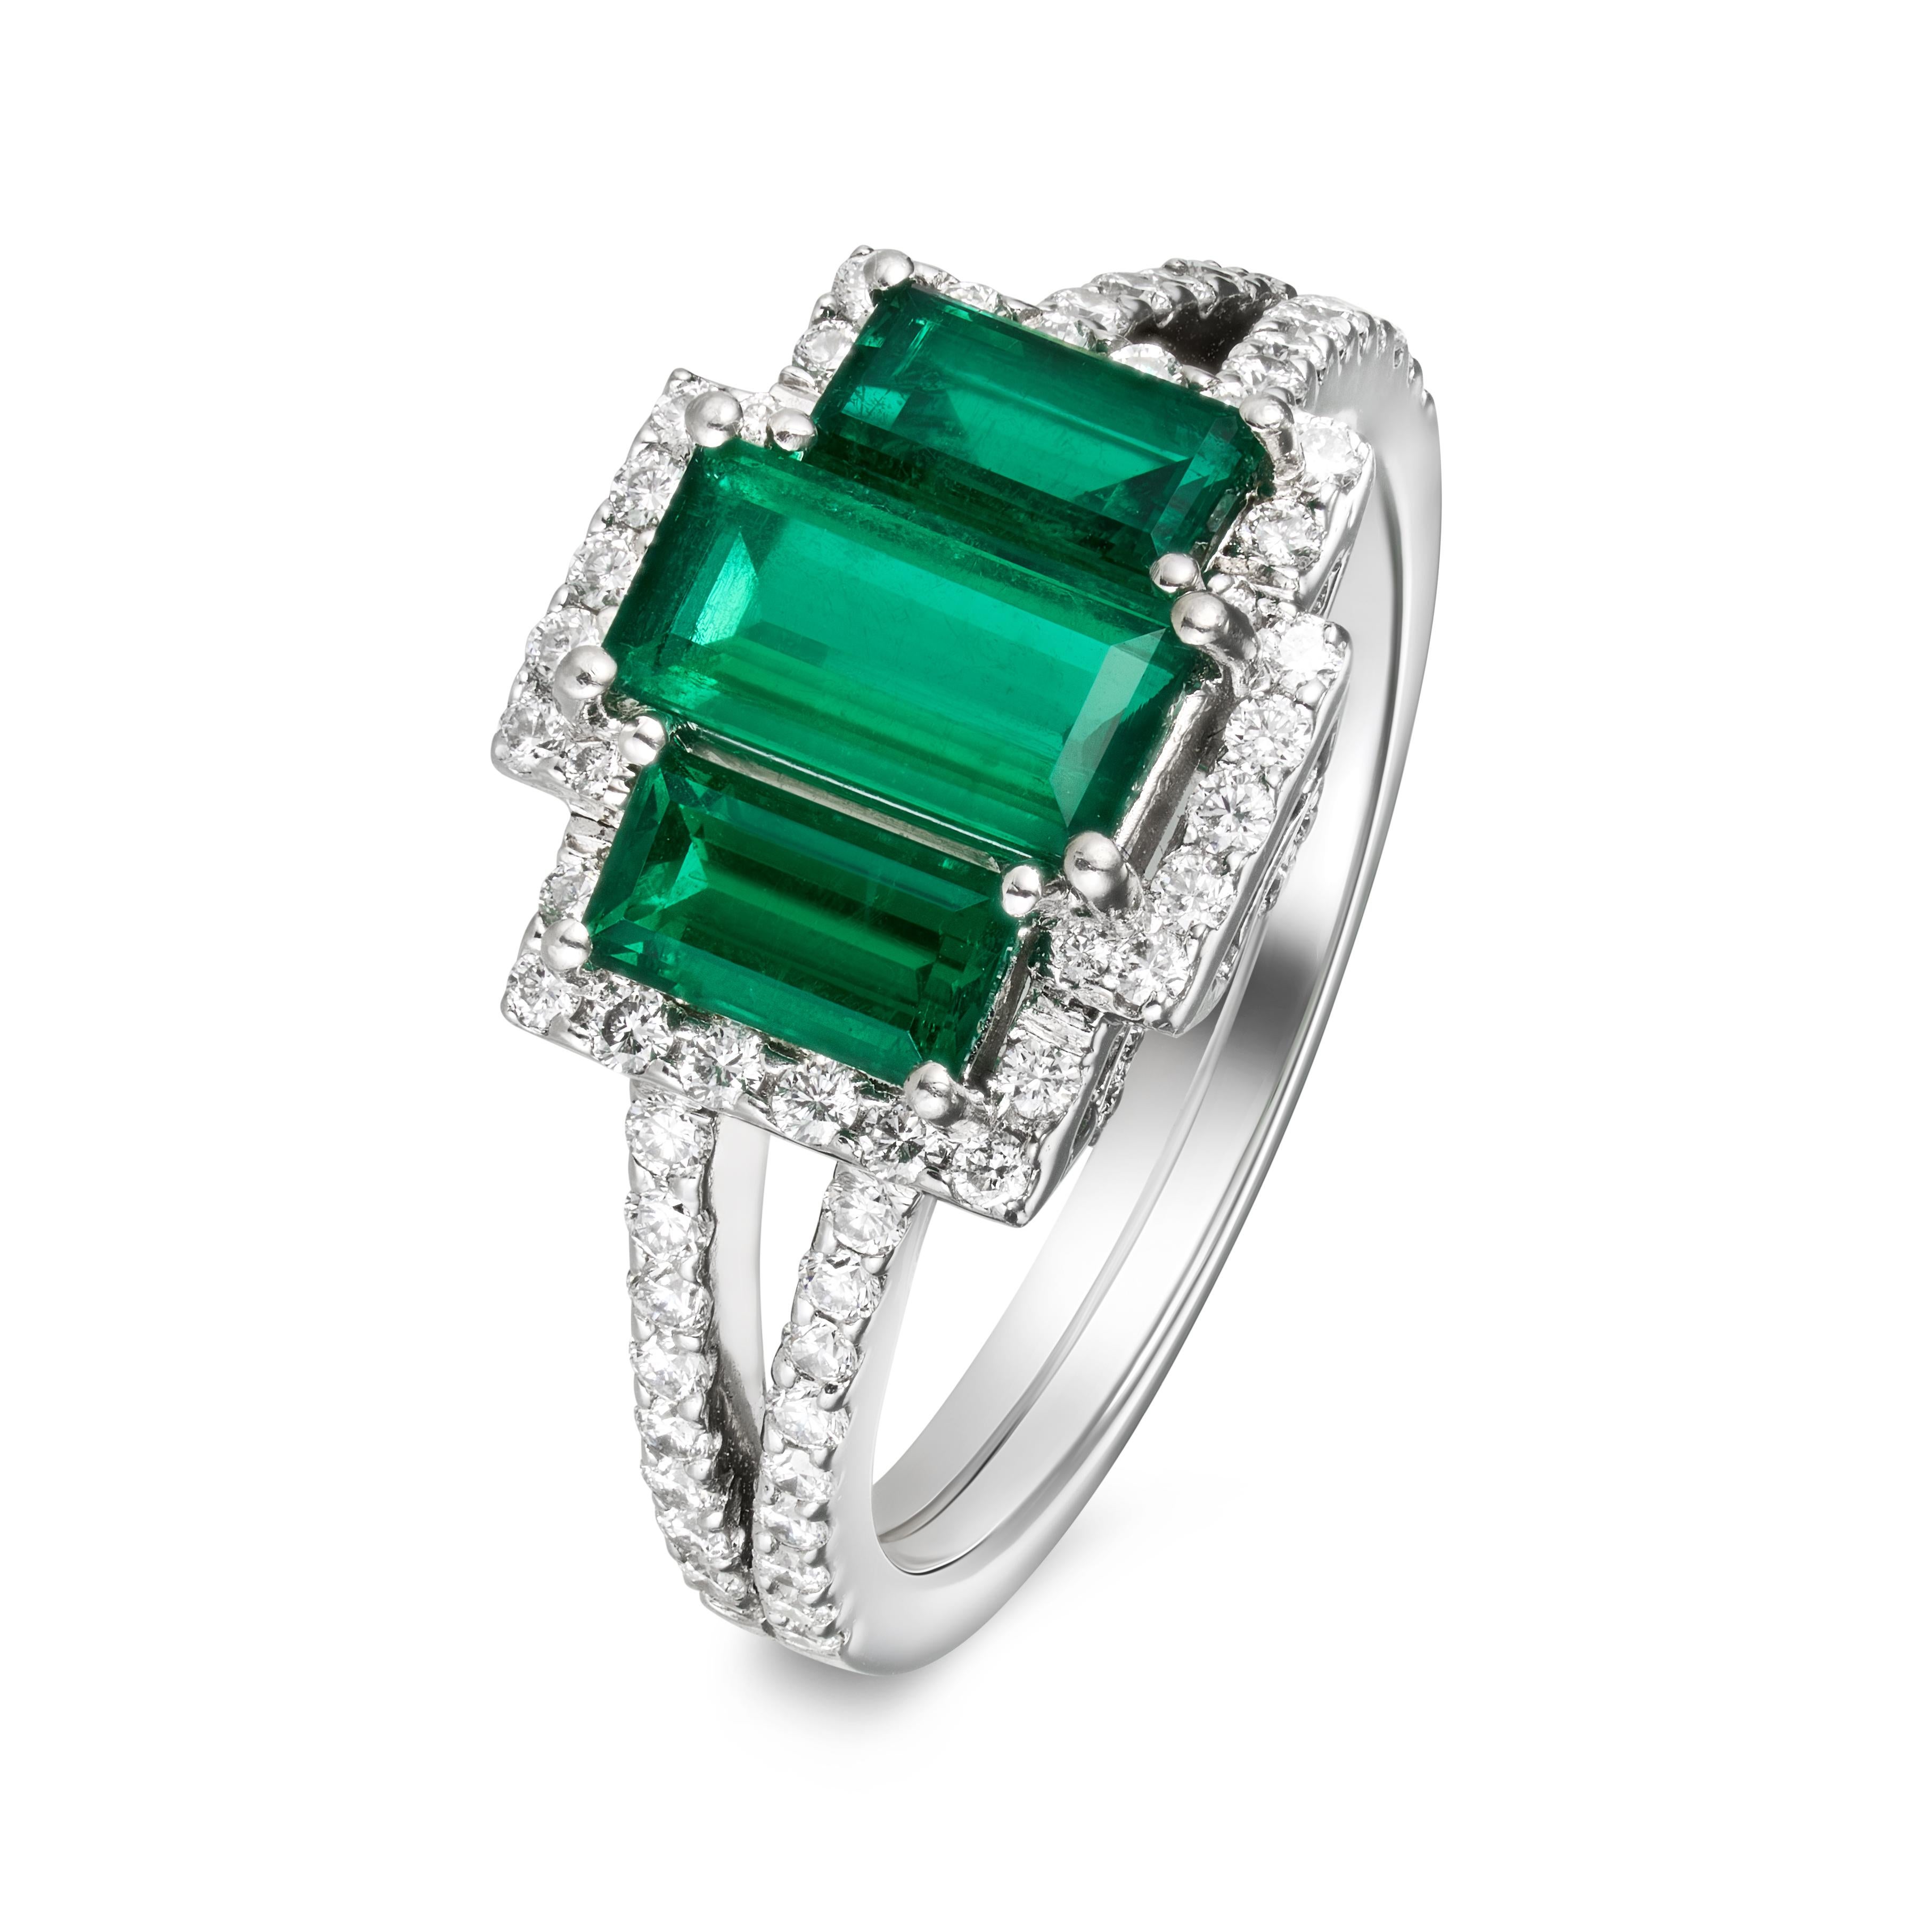 Emerald Cut Certified Natural Emerald Diamond 3 Stone Ring - Vivid Green  For Sale